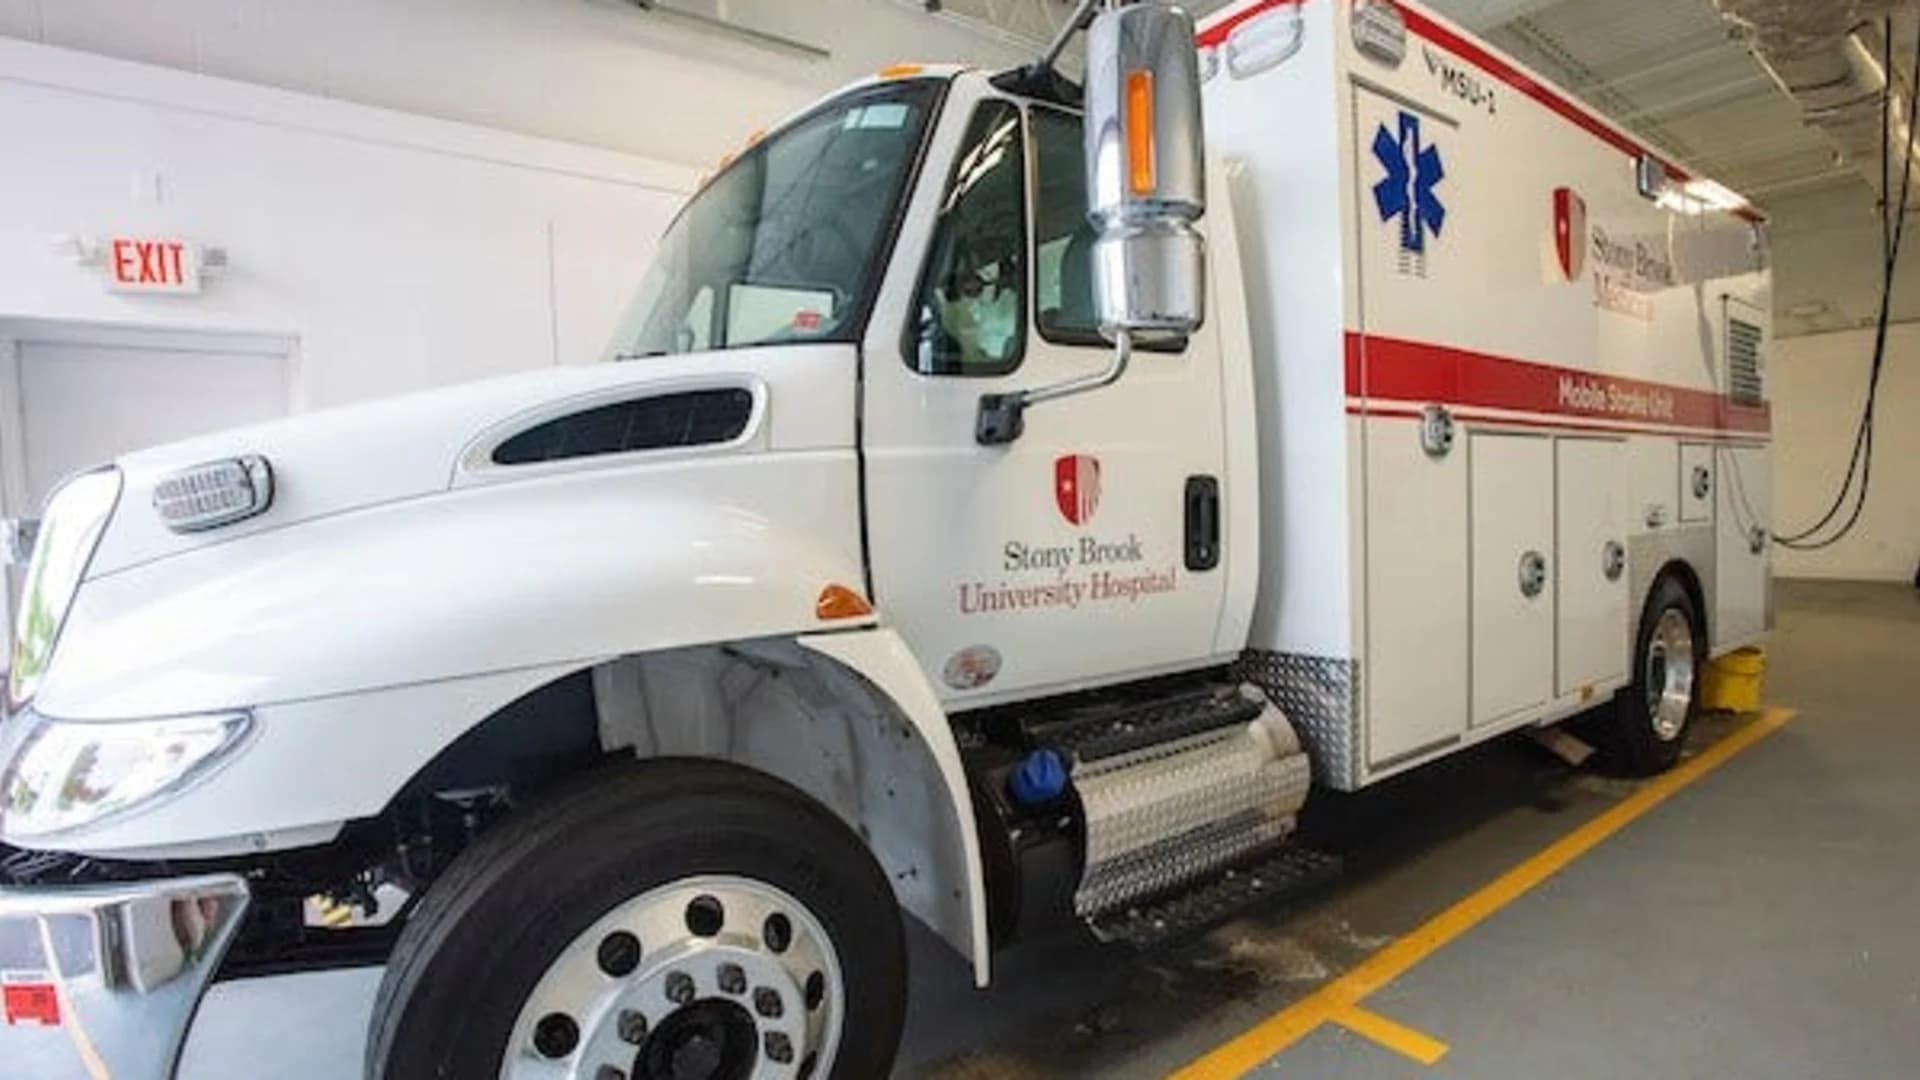 Stony Brook utilizes Mobile Stroke Unit for emergency treatment during pandemic